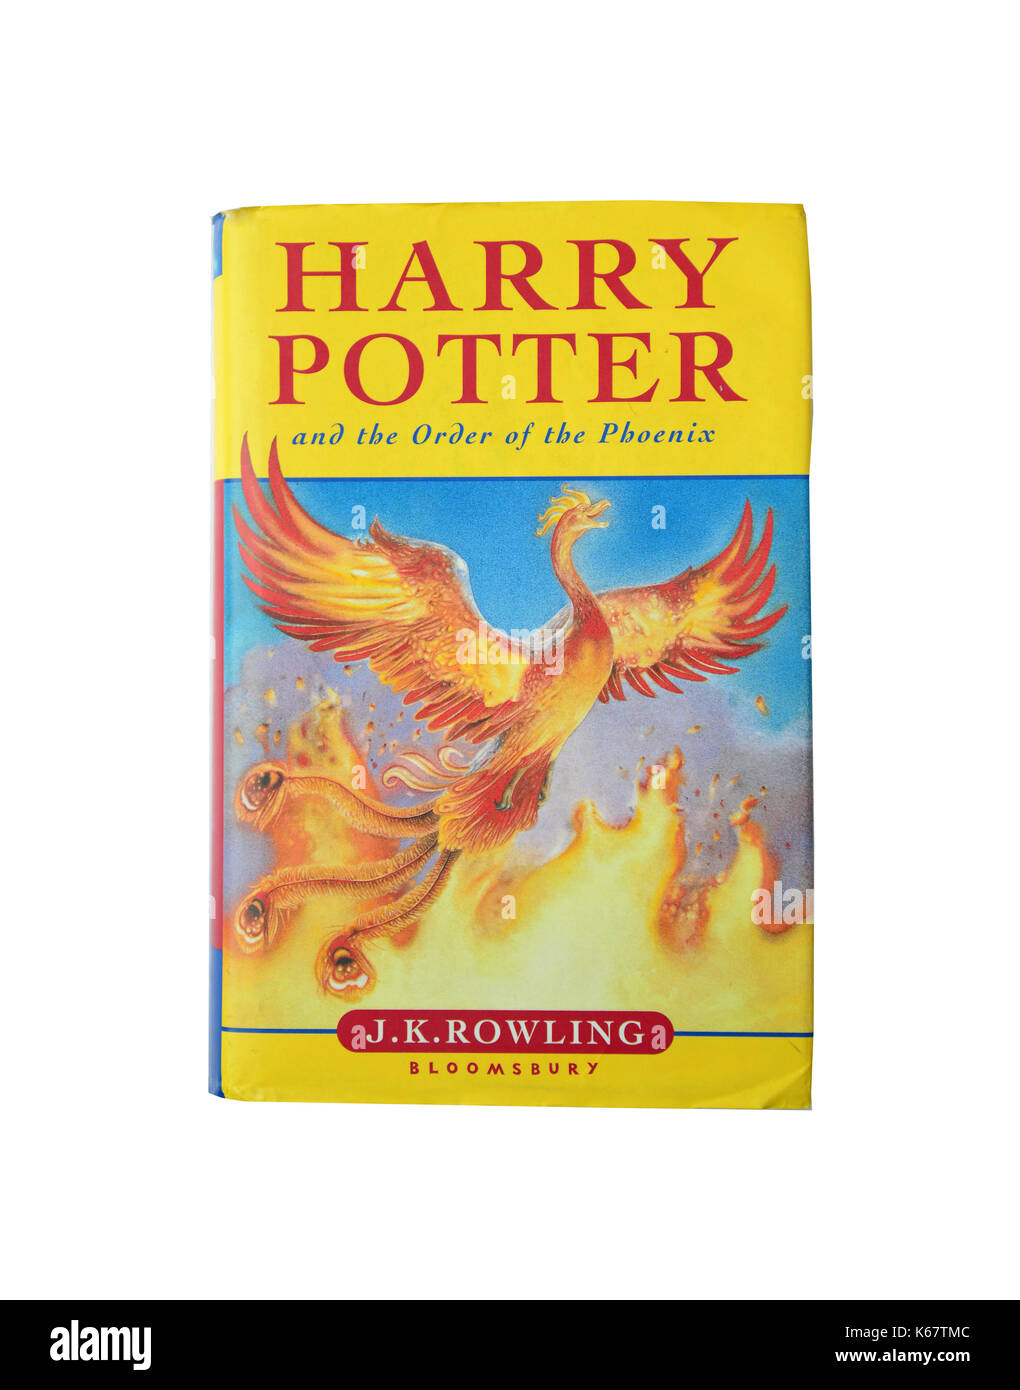 J.K.Rowling's 'Harry Potter and the Order of the Phoenix' book, Surrey, England, United Kingdom Stock Photo